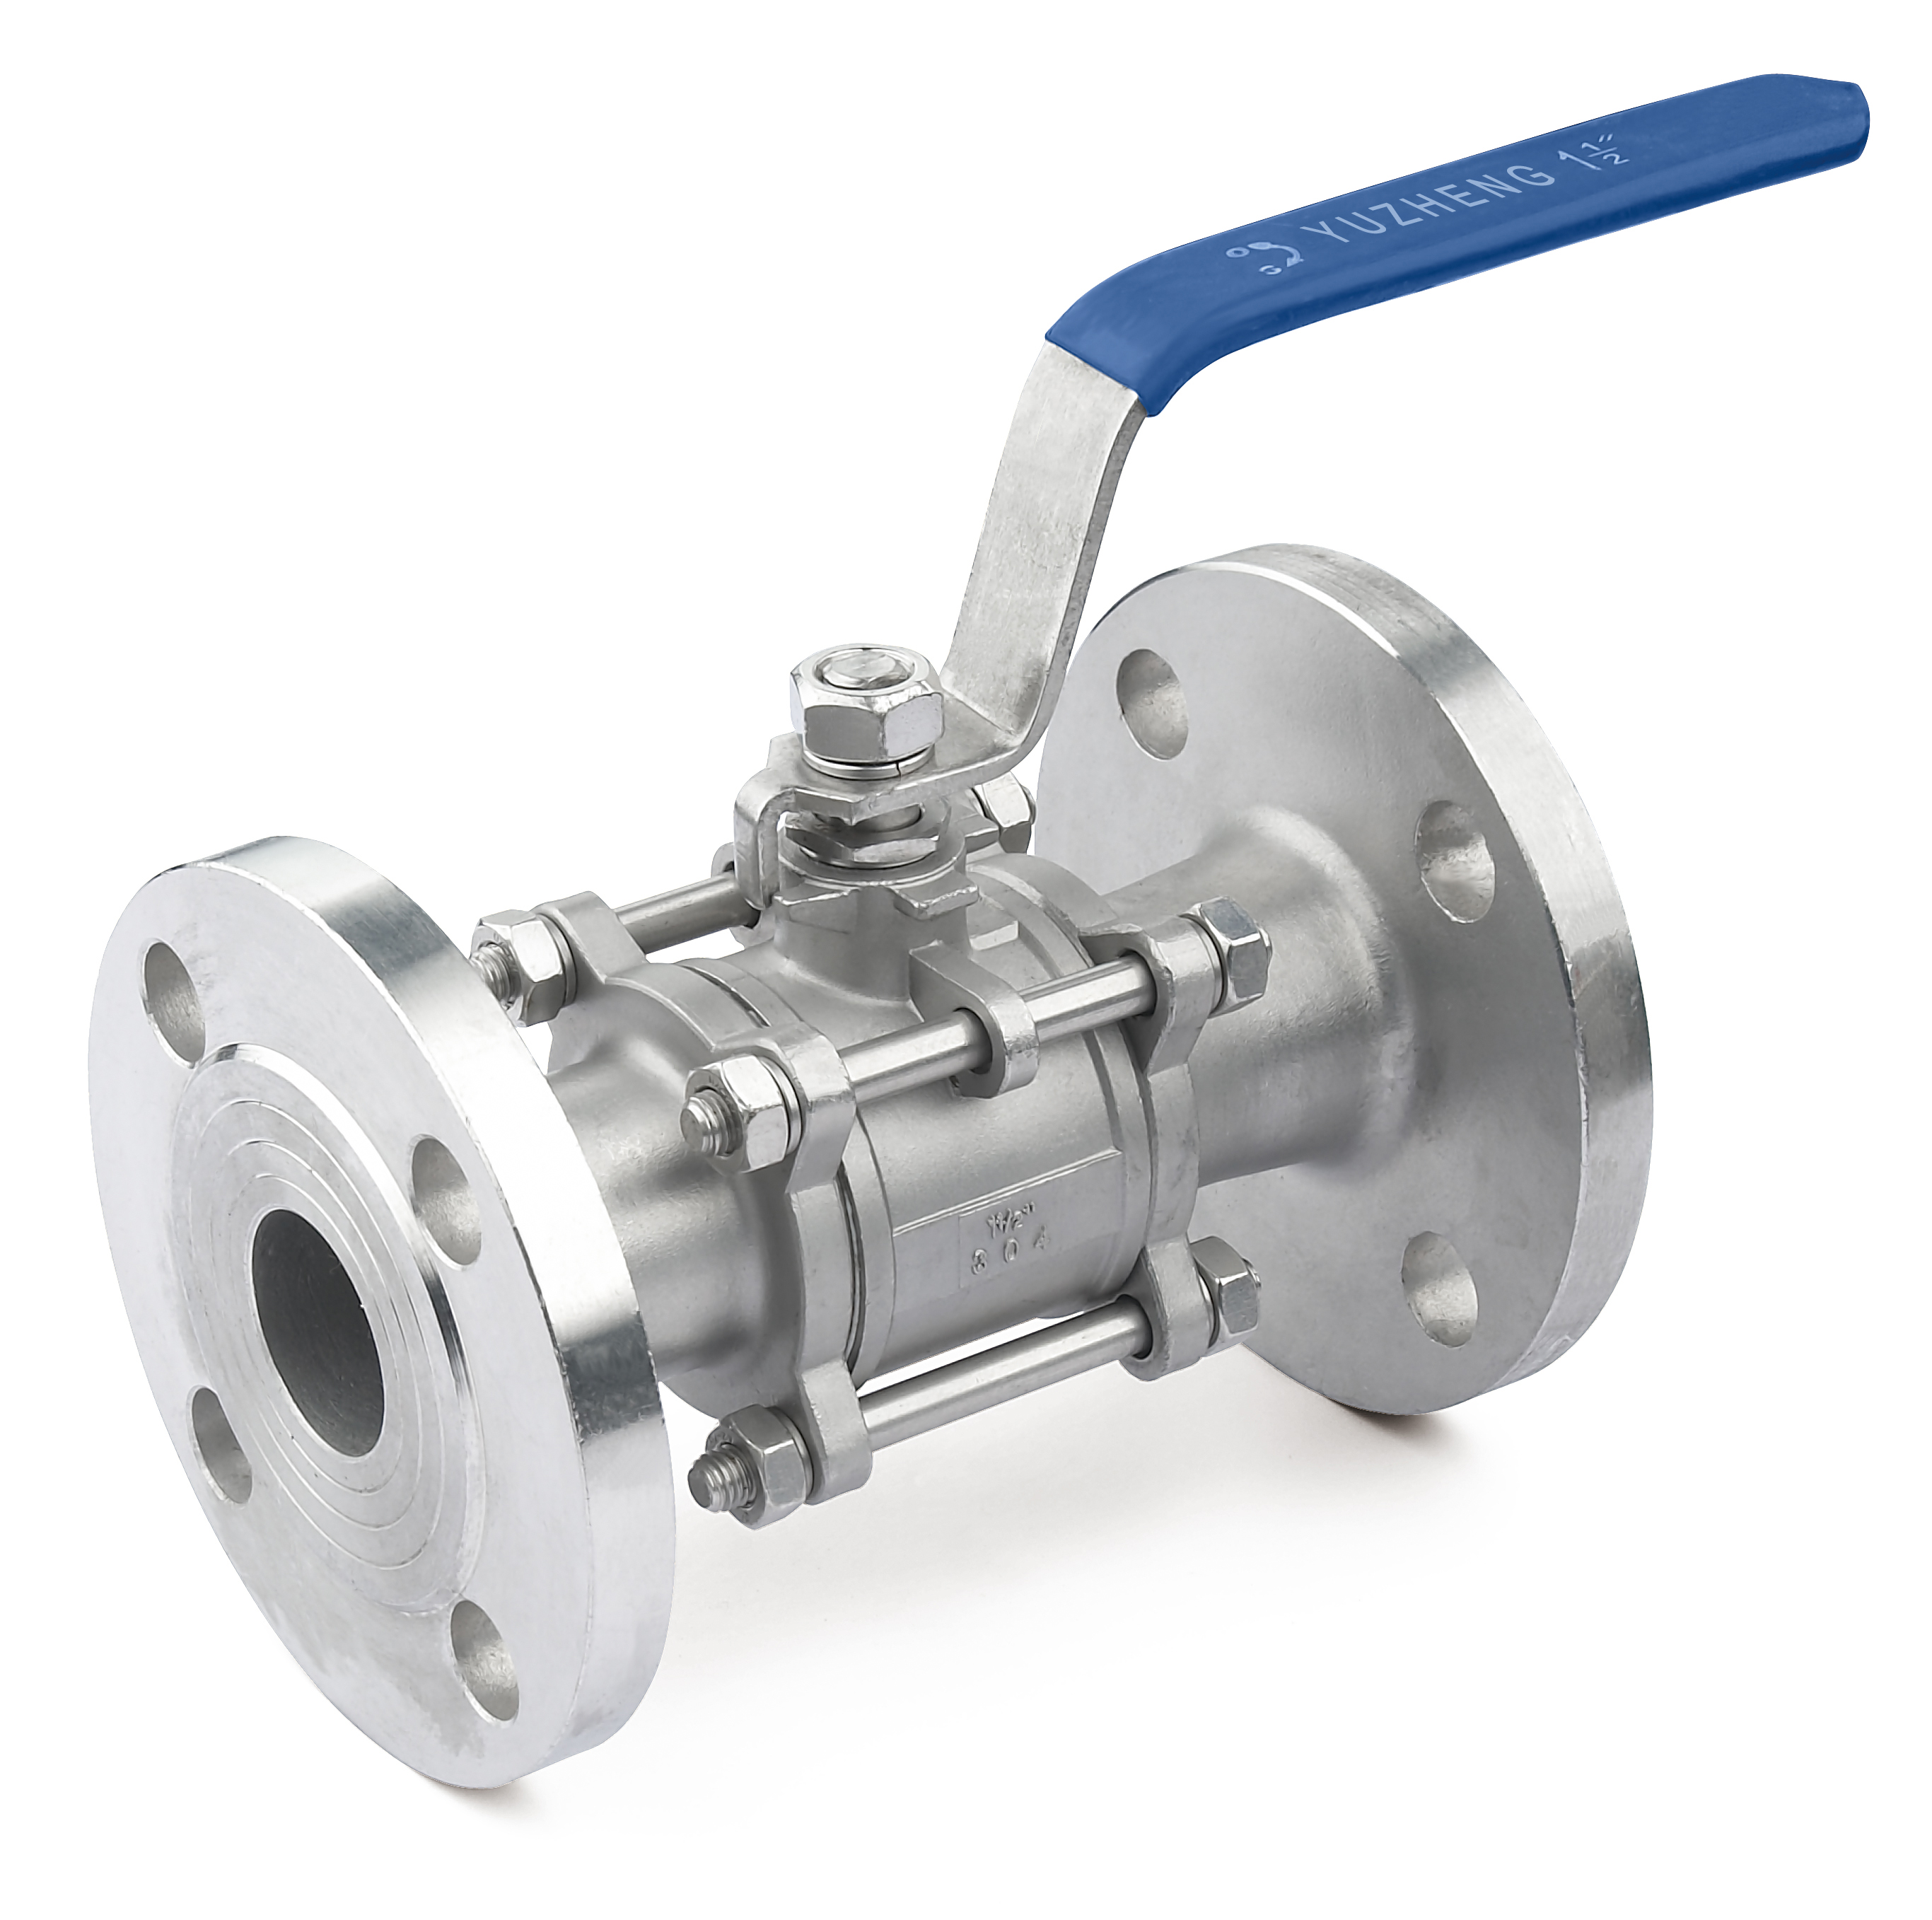 3PC Stainless Steel Flanged Ball Valve - Buy Product on Wenzhou Yuzheng